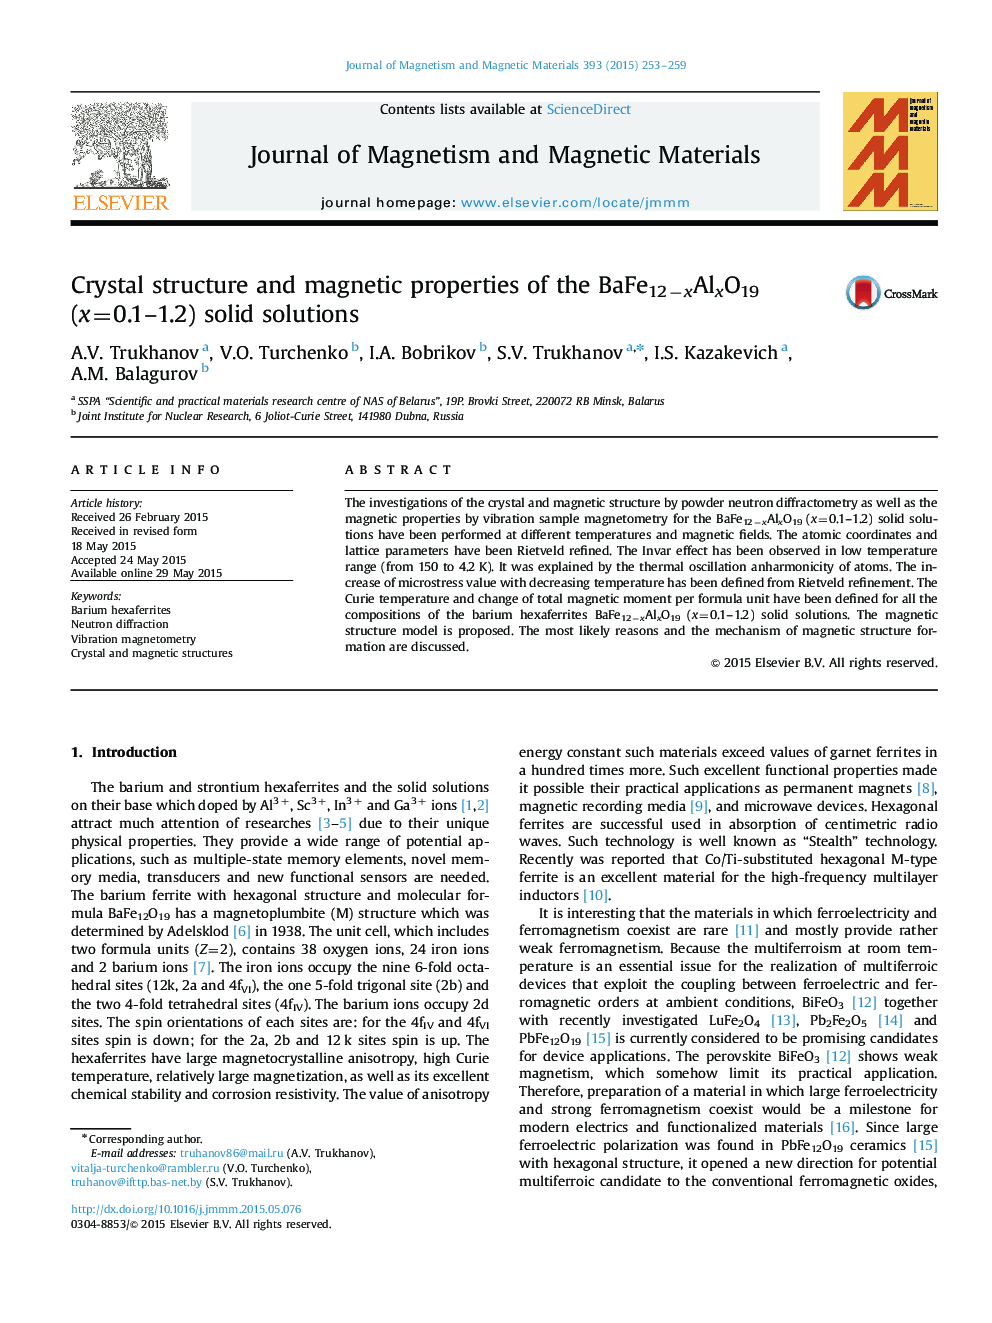 Crystal structure and magnetic properties of the BaFe12−xAlxO19 (x=0.1–1.2) solid solutions